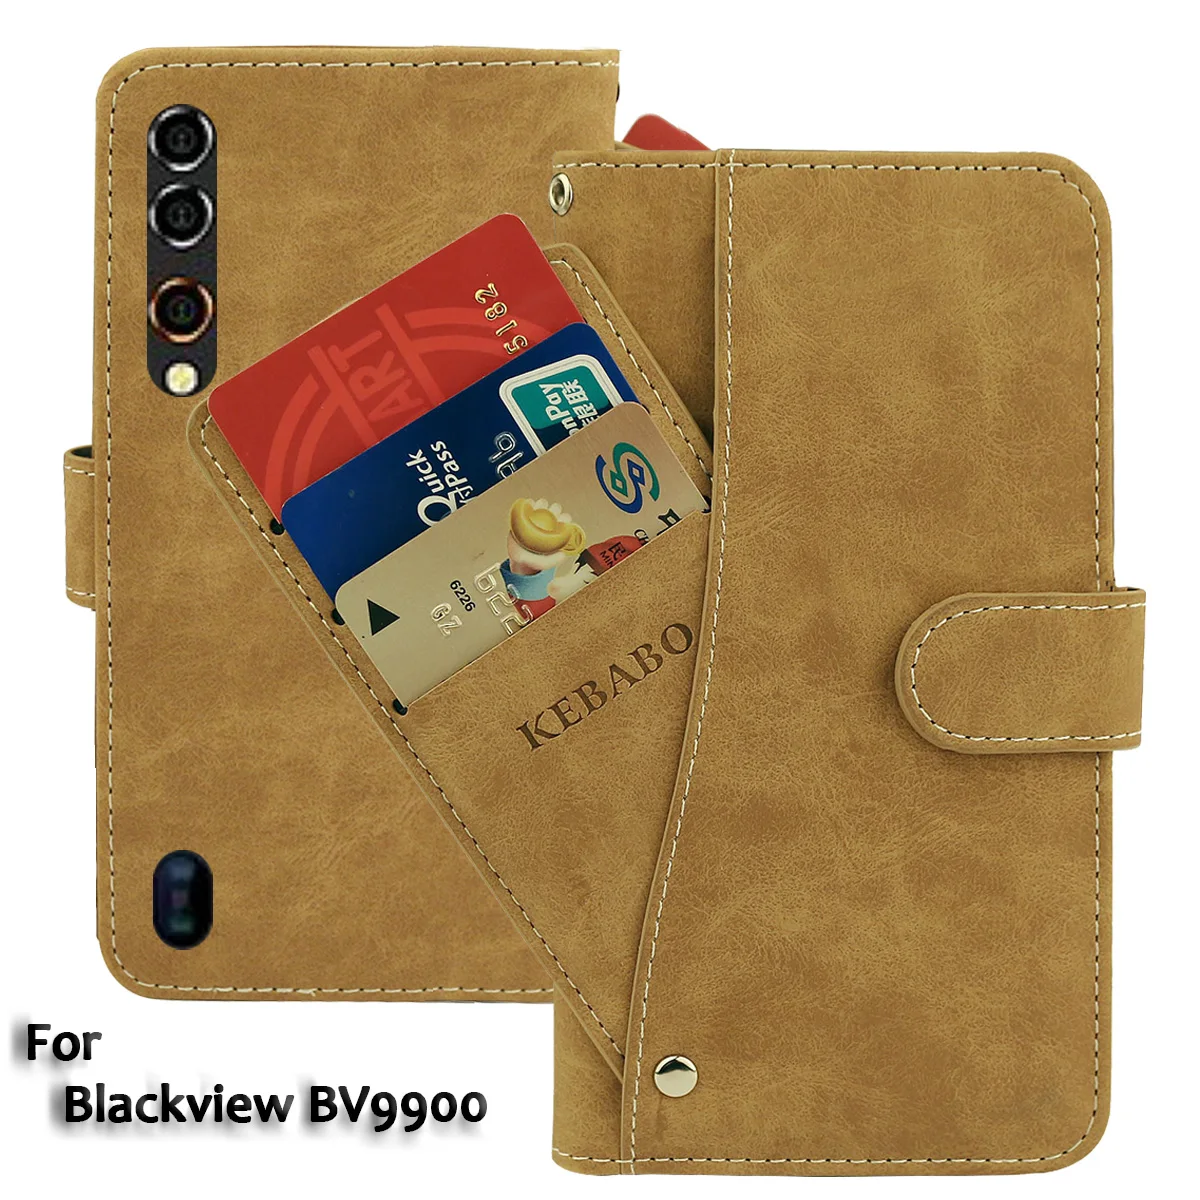 

Vintage Leather Wallet Blackview BV9900 Case 5.84" Flip Luxury Card Slots Cover Magnet Stand Phone Protective Bags